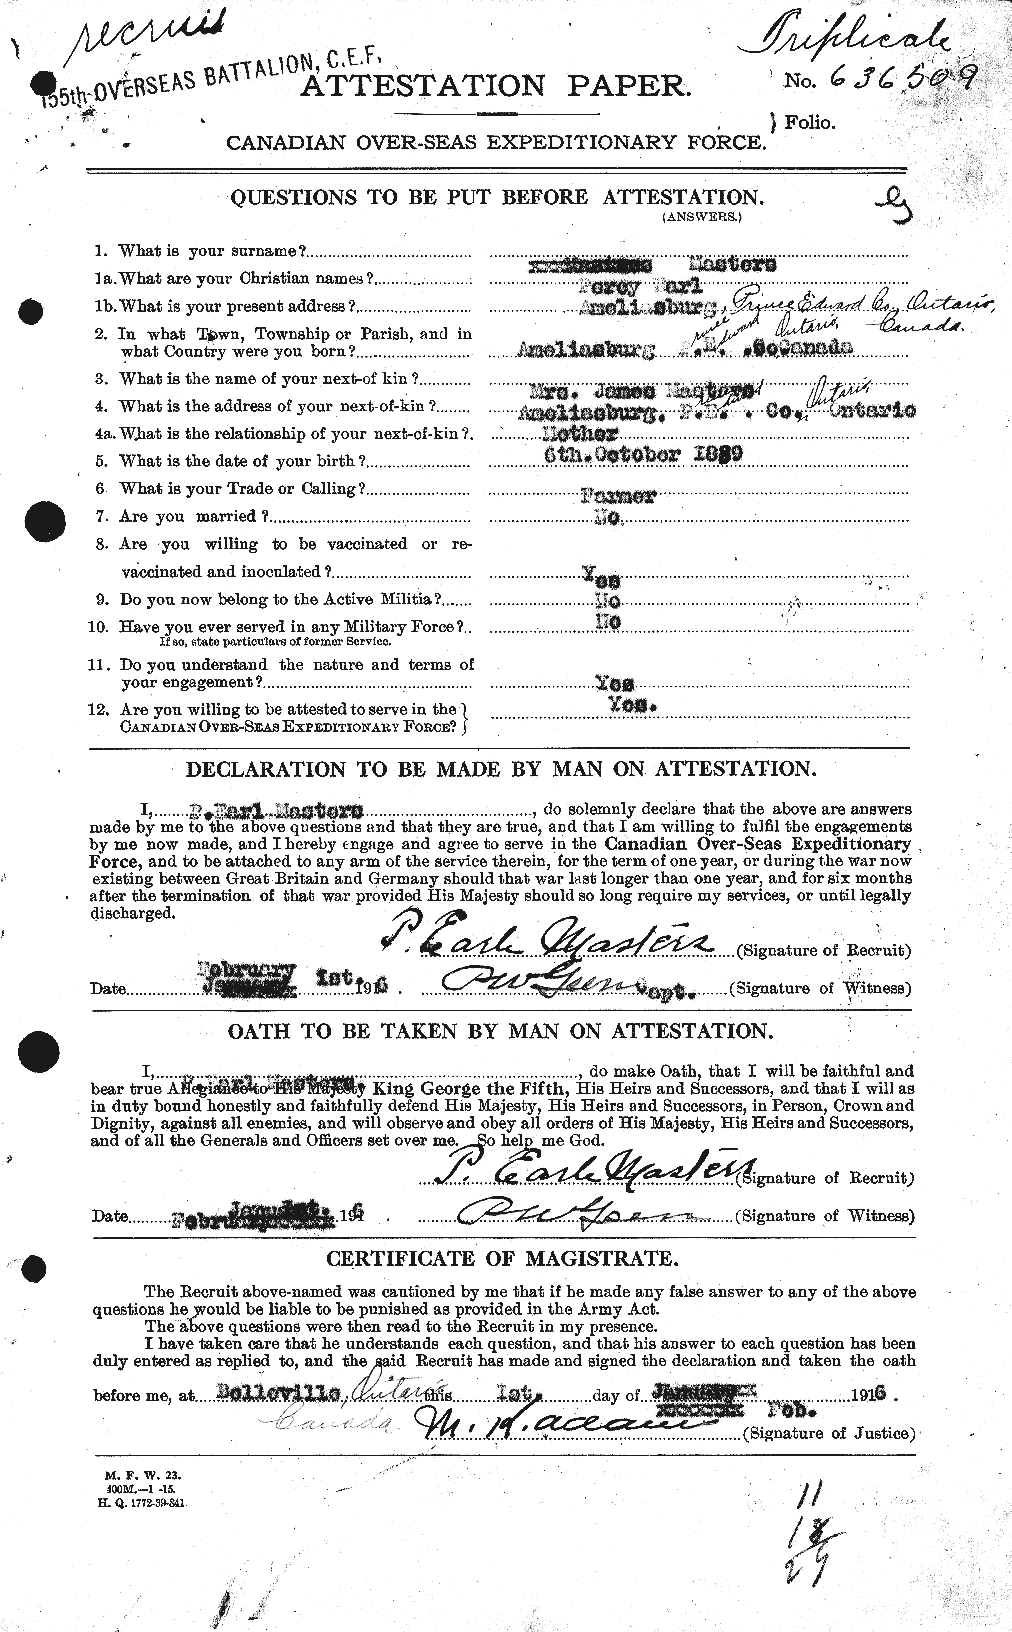 Personnel Records of the First World War - CEF 488450a